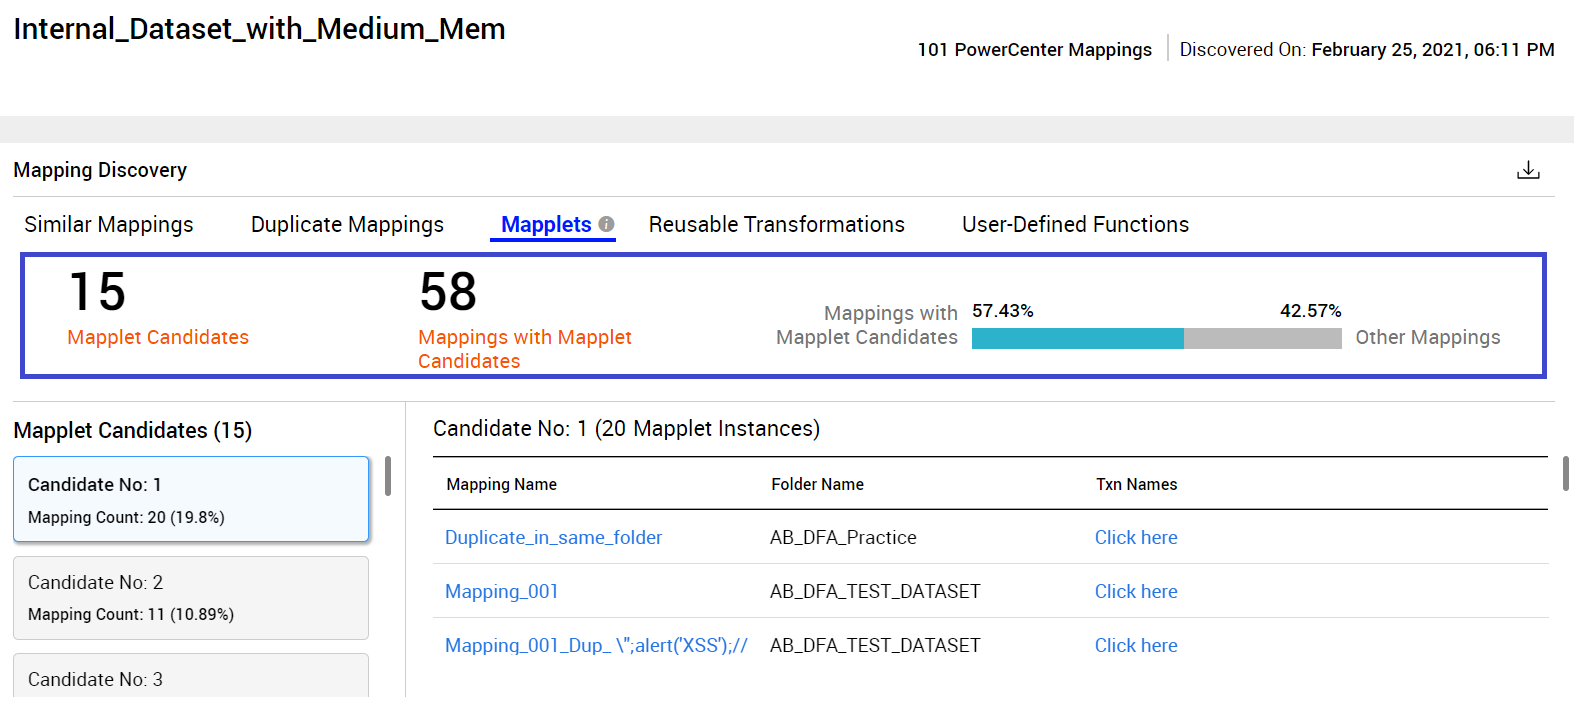 The image contains a sample Mapping Discovery section with the Mapplets tab selected.